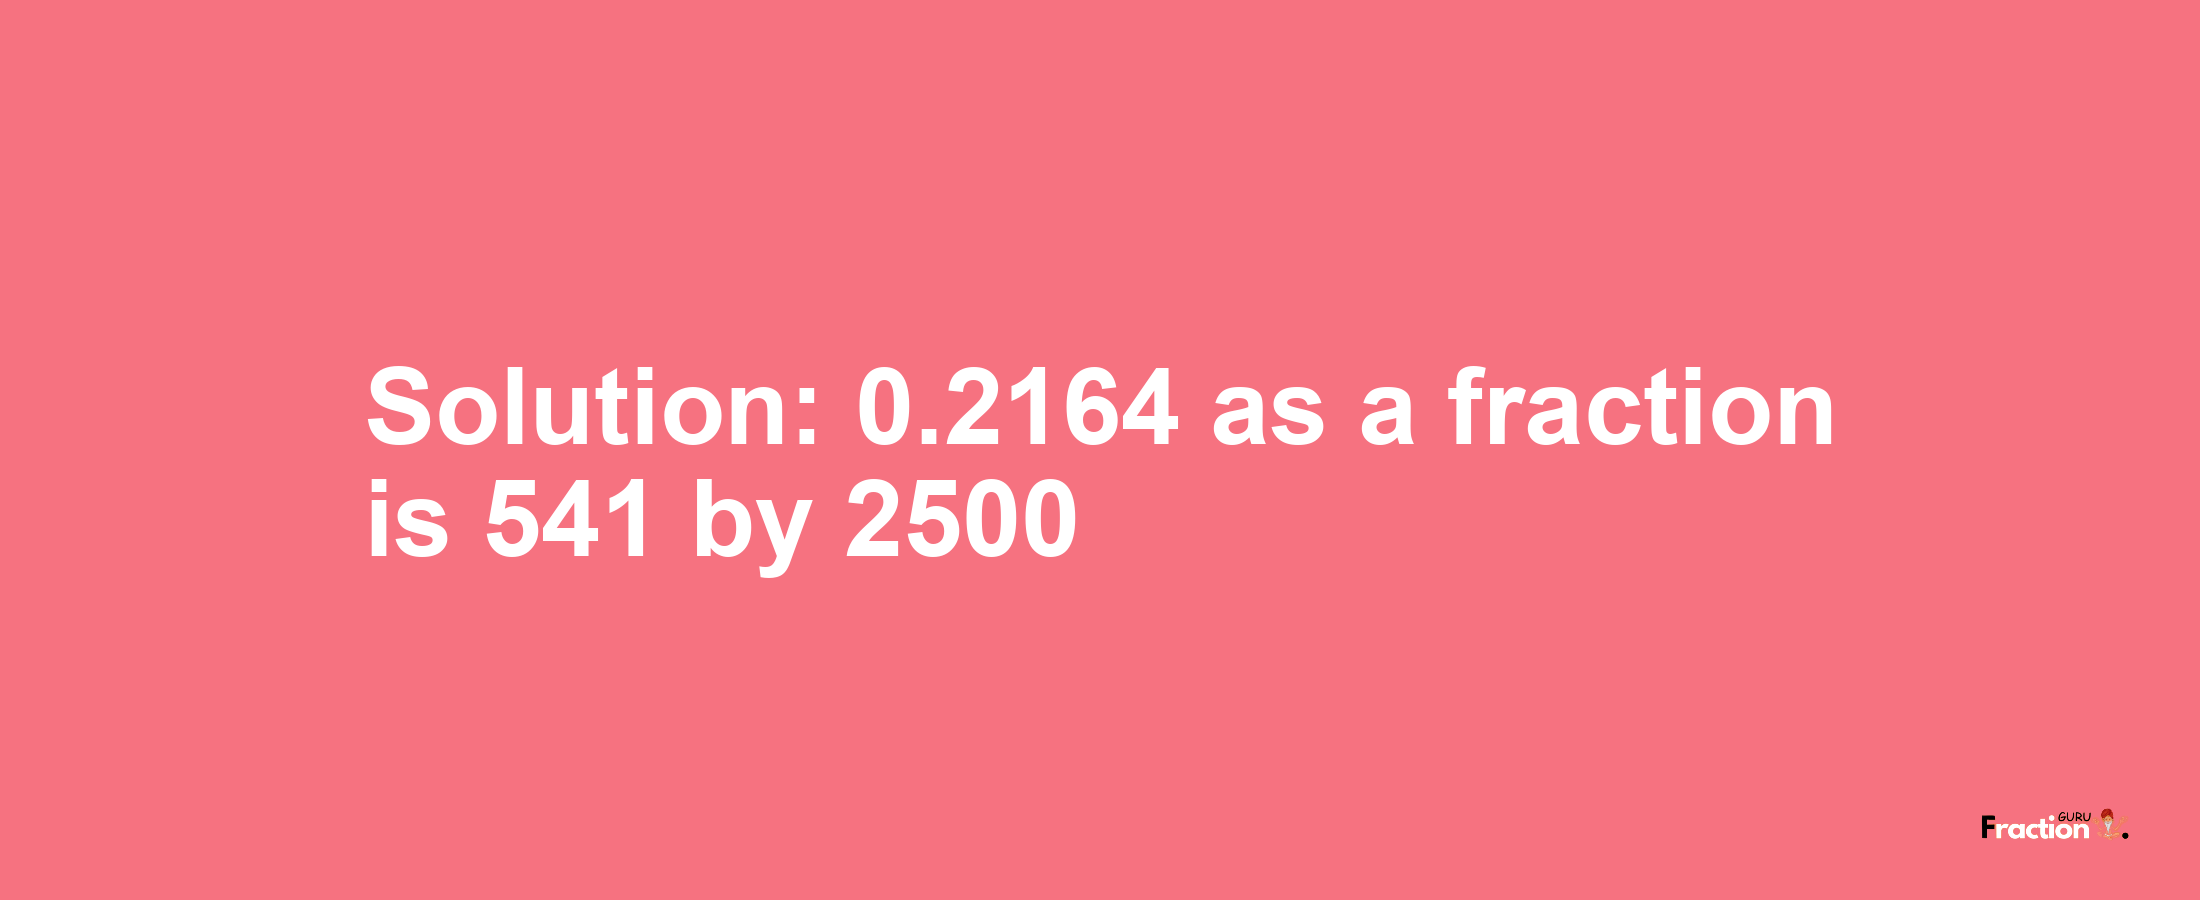 Solution:0.2164 as a fraction is 541/2500